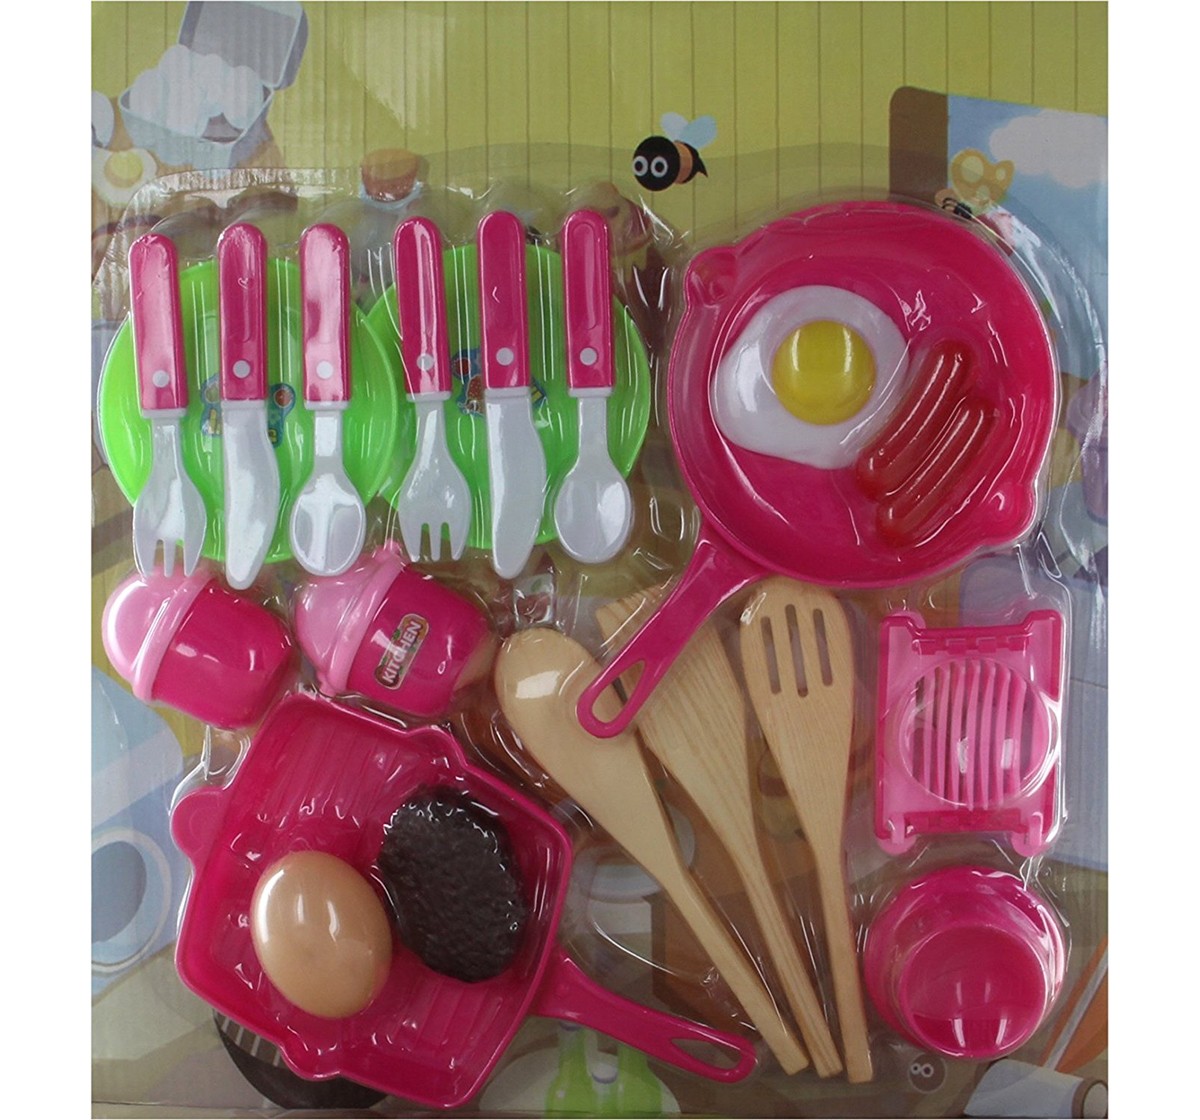 Comdaq Pans And Cutlery Kitchen Set for age 3Y+ 